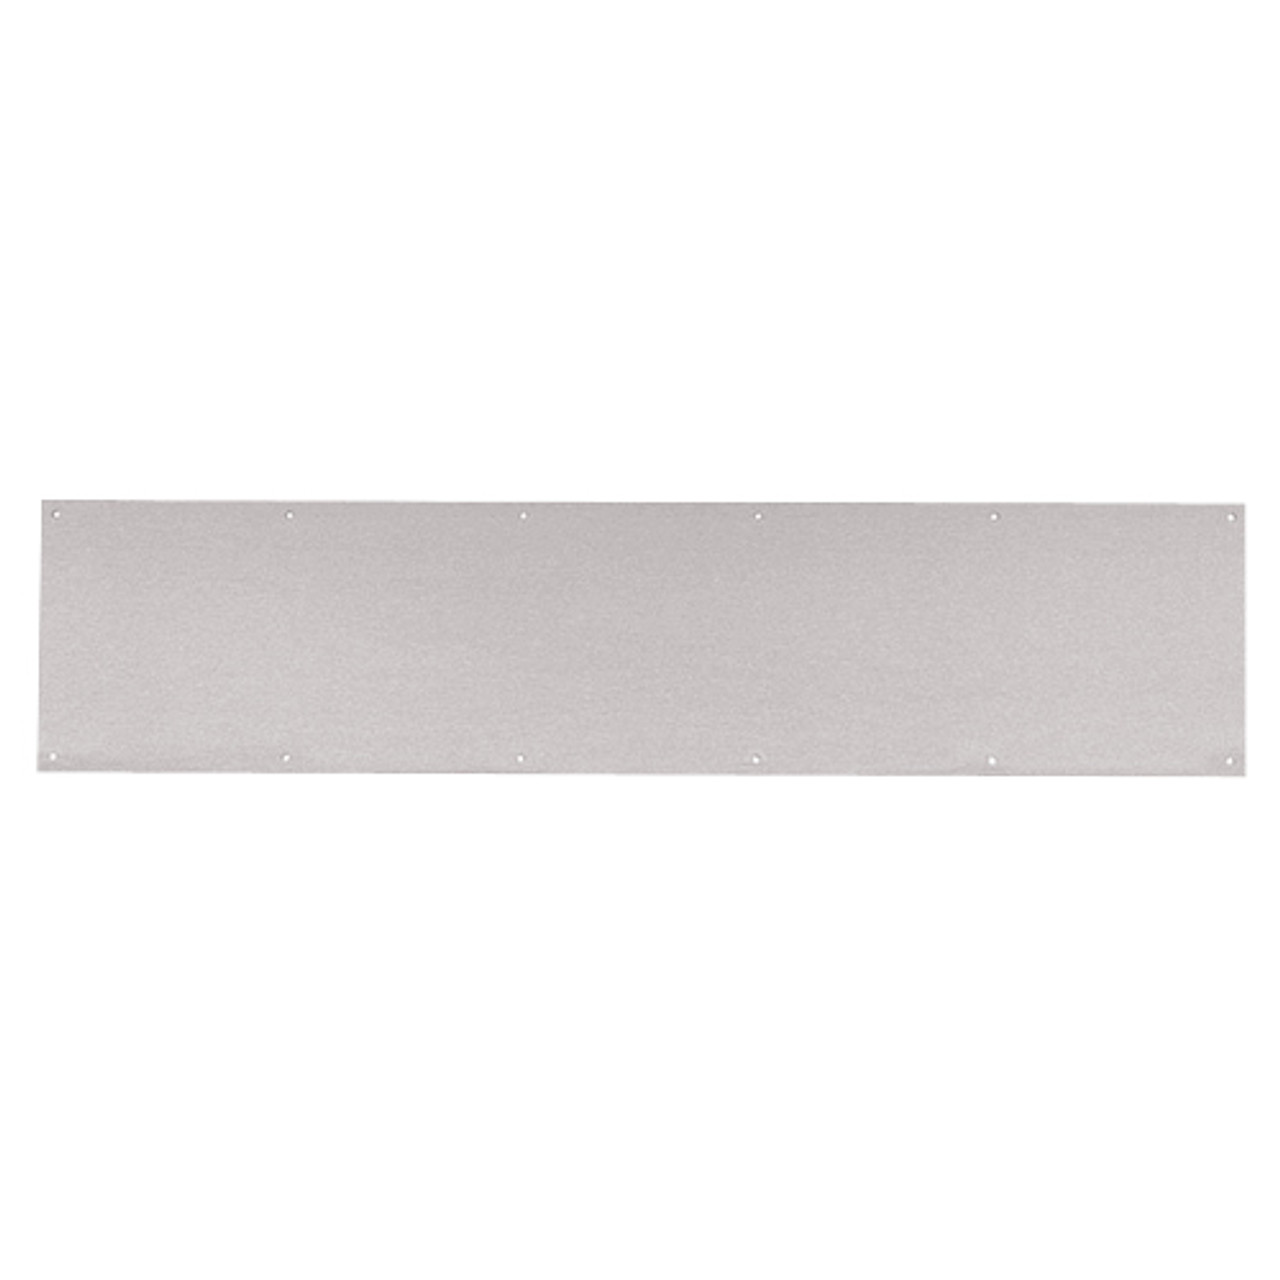 8400-US32D-6x36-B-CS Ives 8400 Series Protection Plate in Satin Stainless Steel